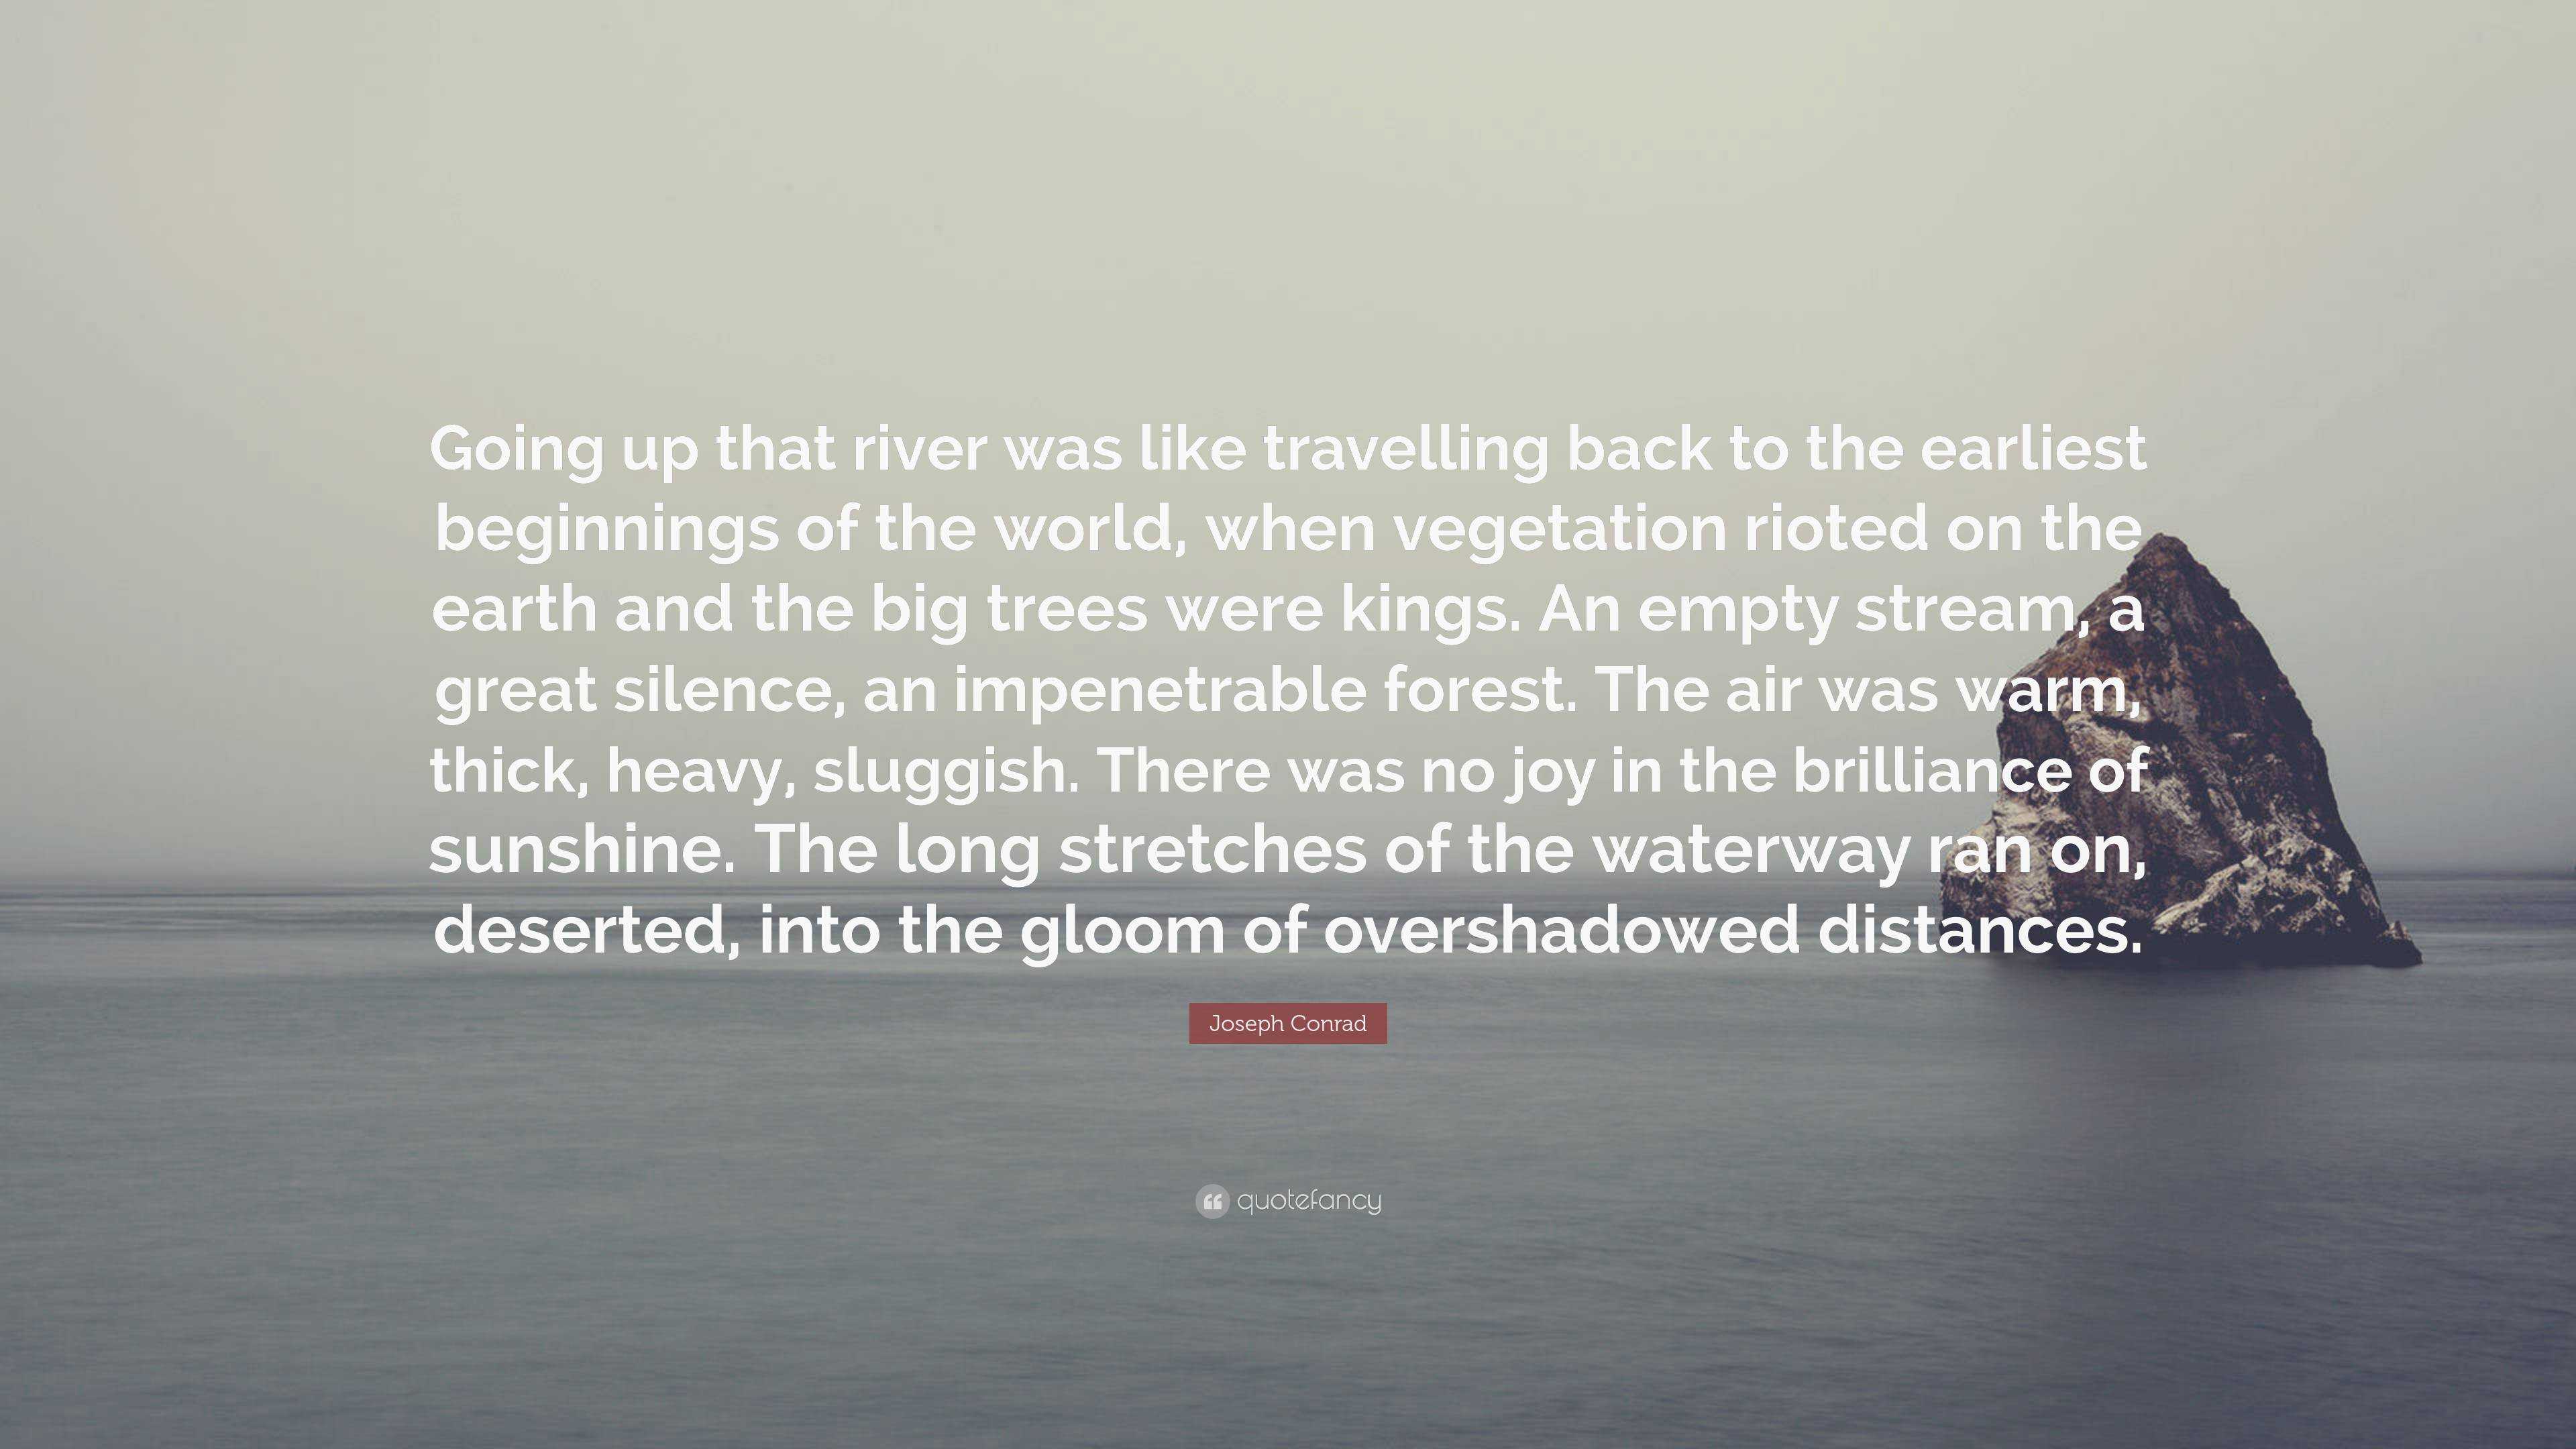 Joseph Conrad Quote: “Going up that river was like travelling back to ...